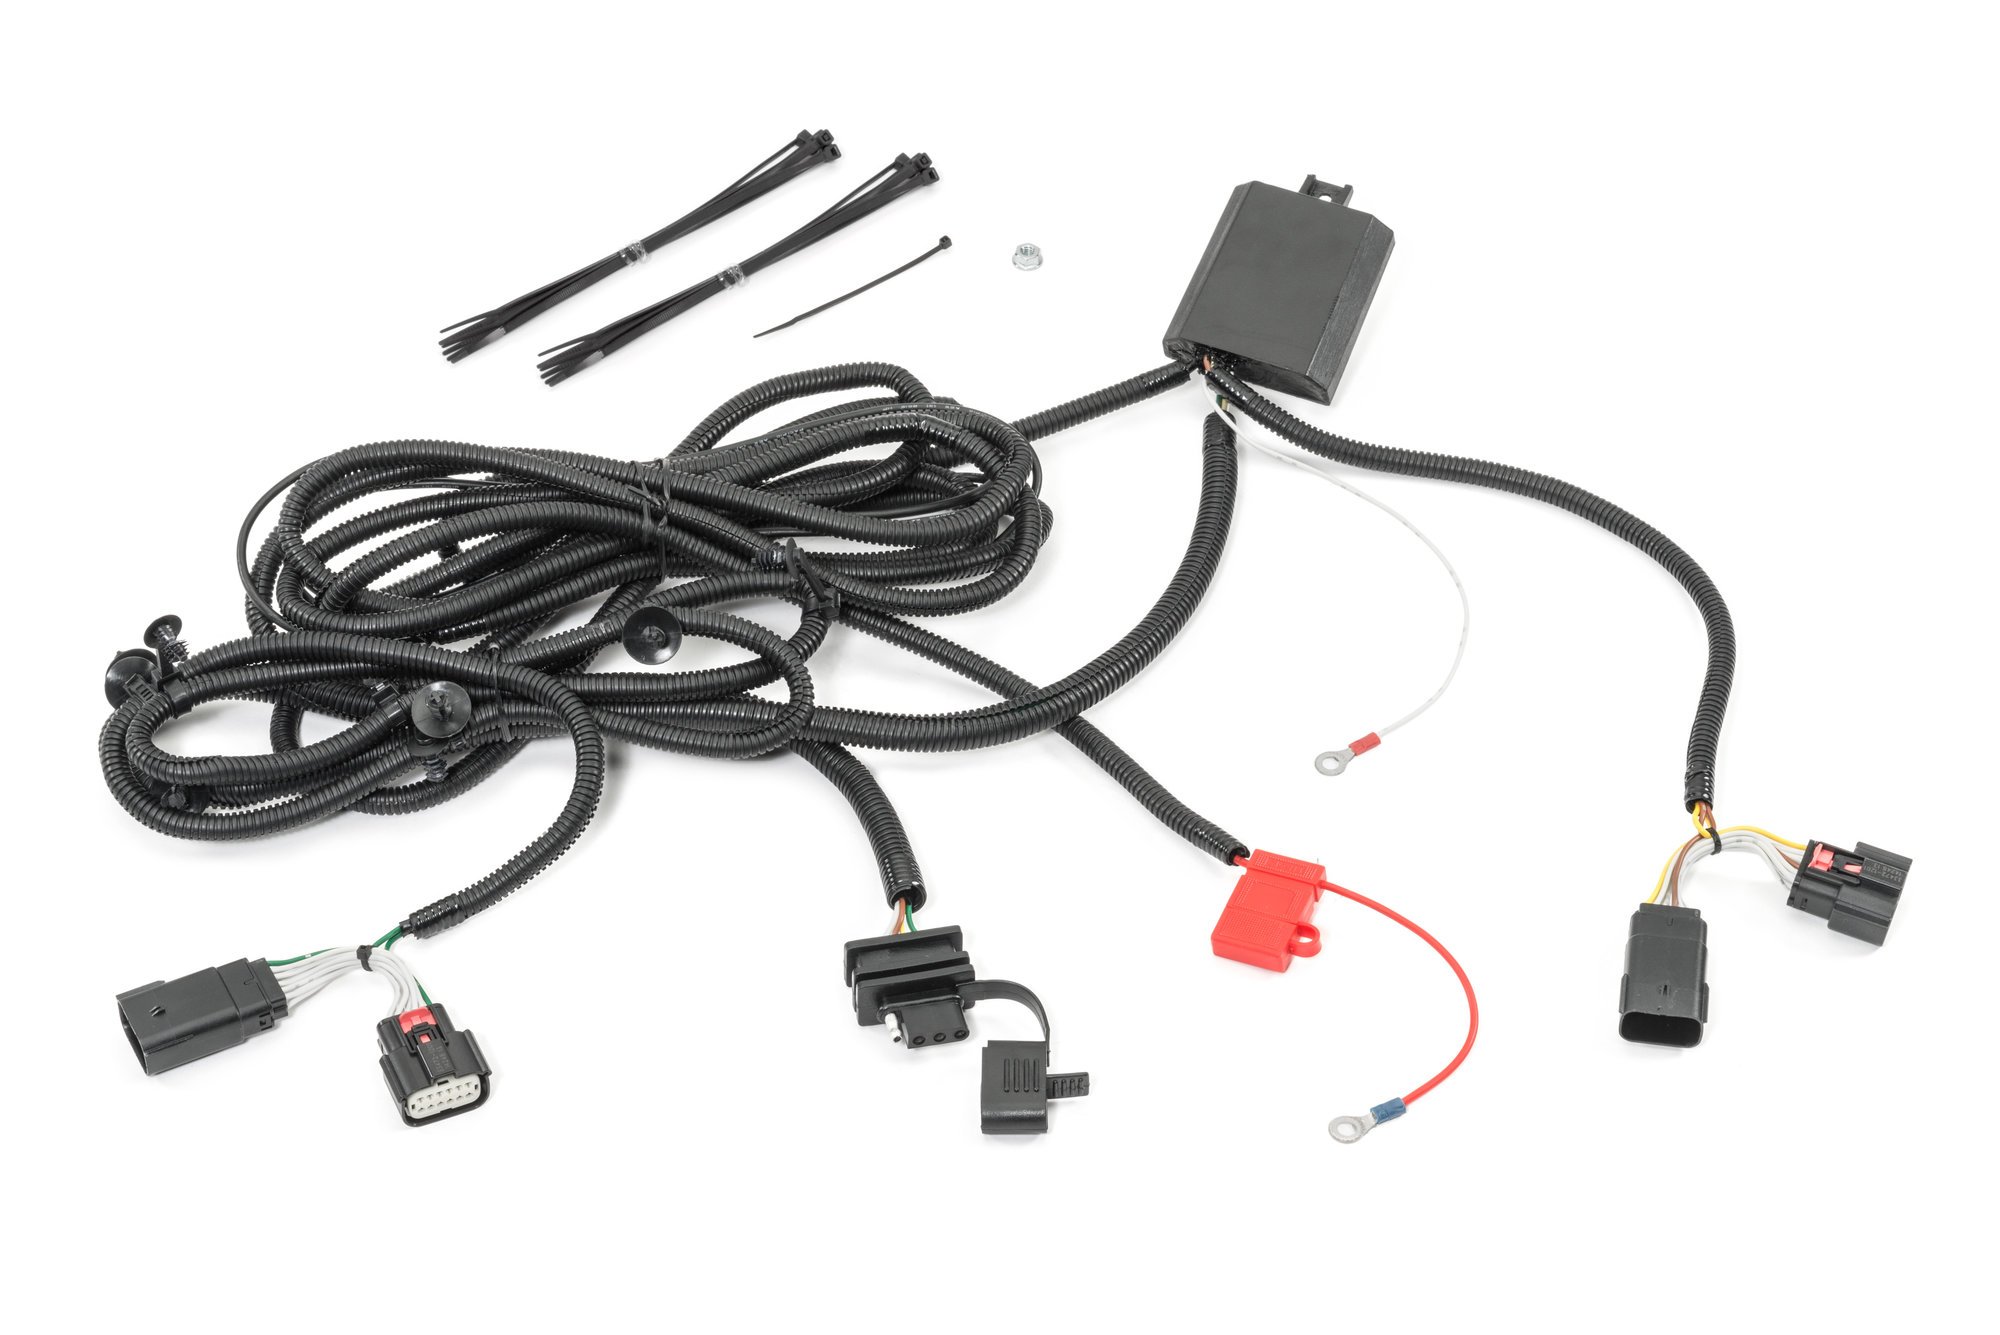 Trailer Wiring Harness For Jeep Wrangler from www.quadratec.com